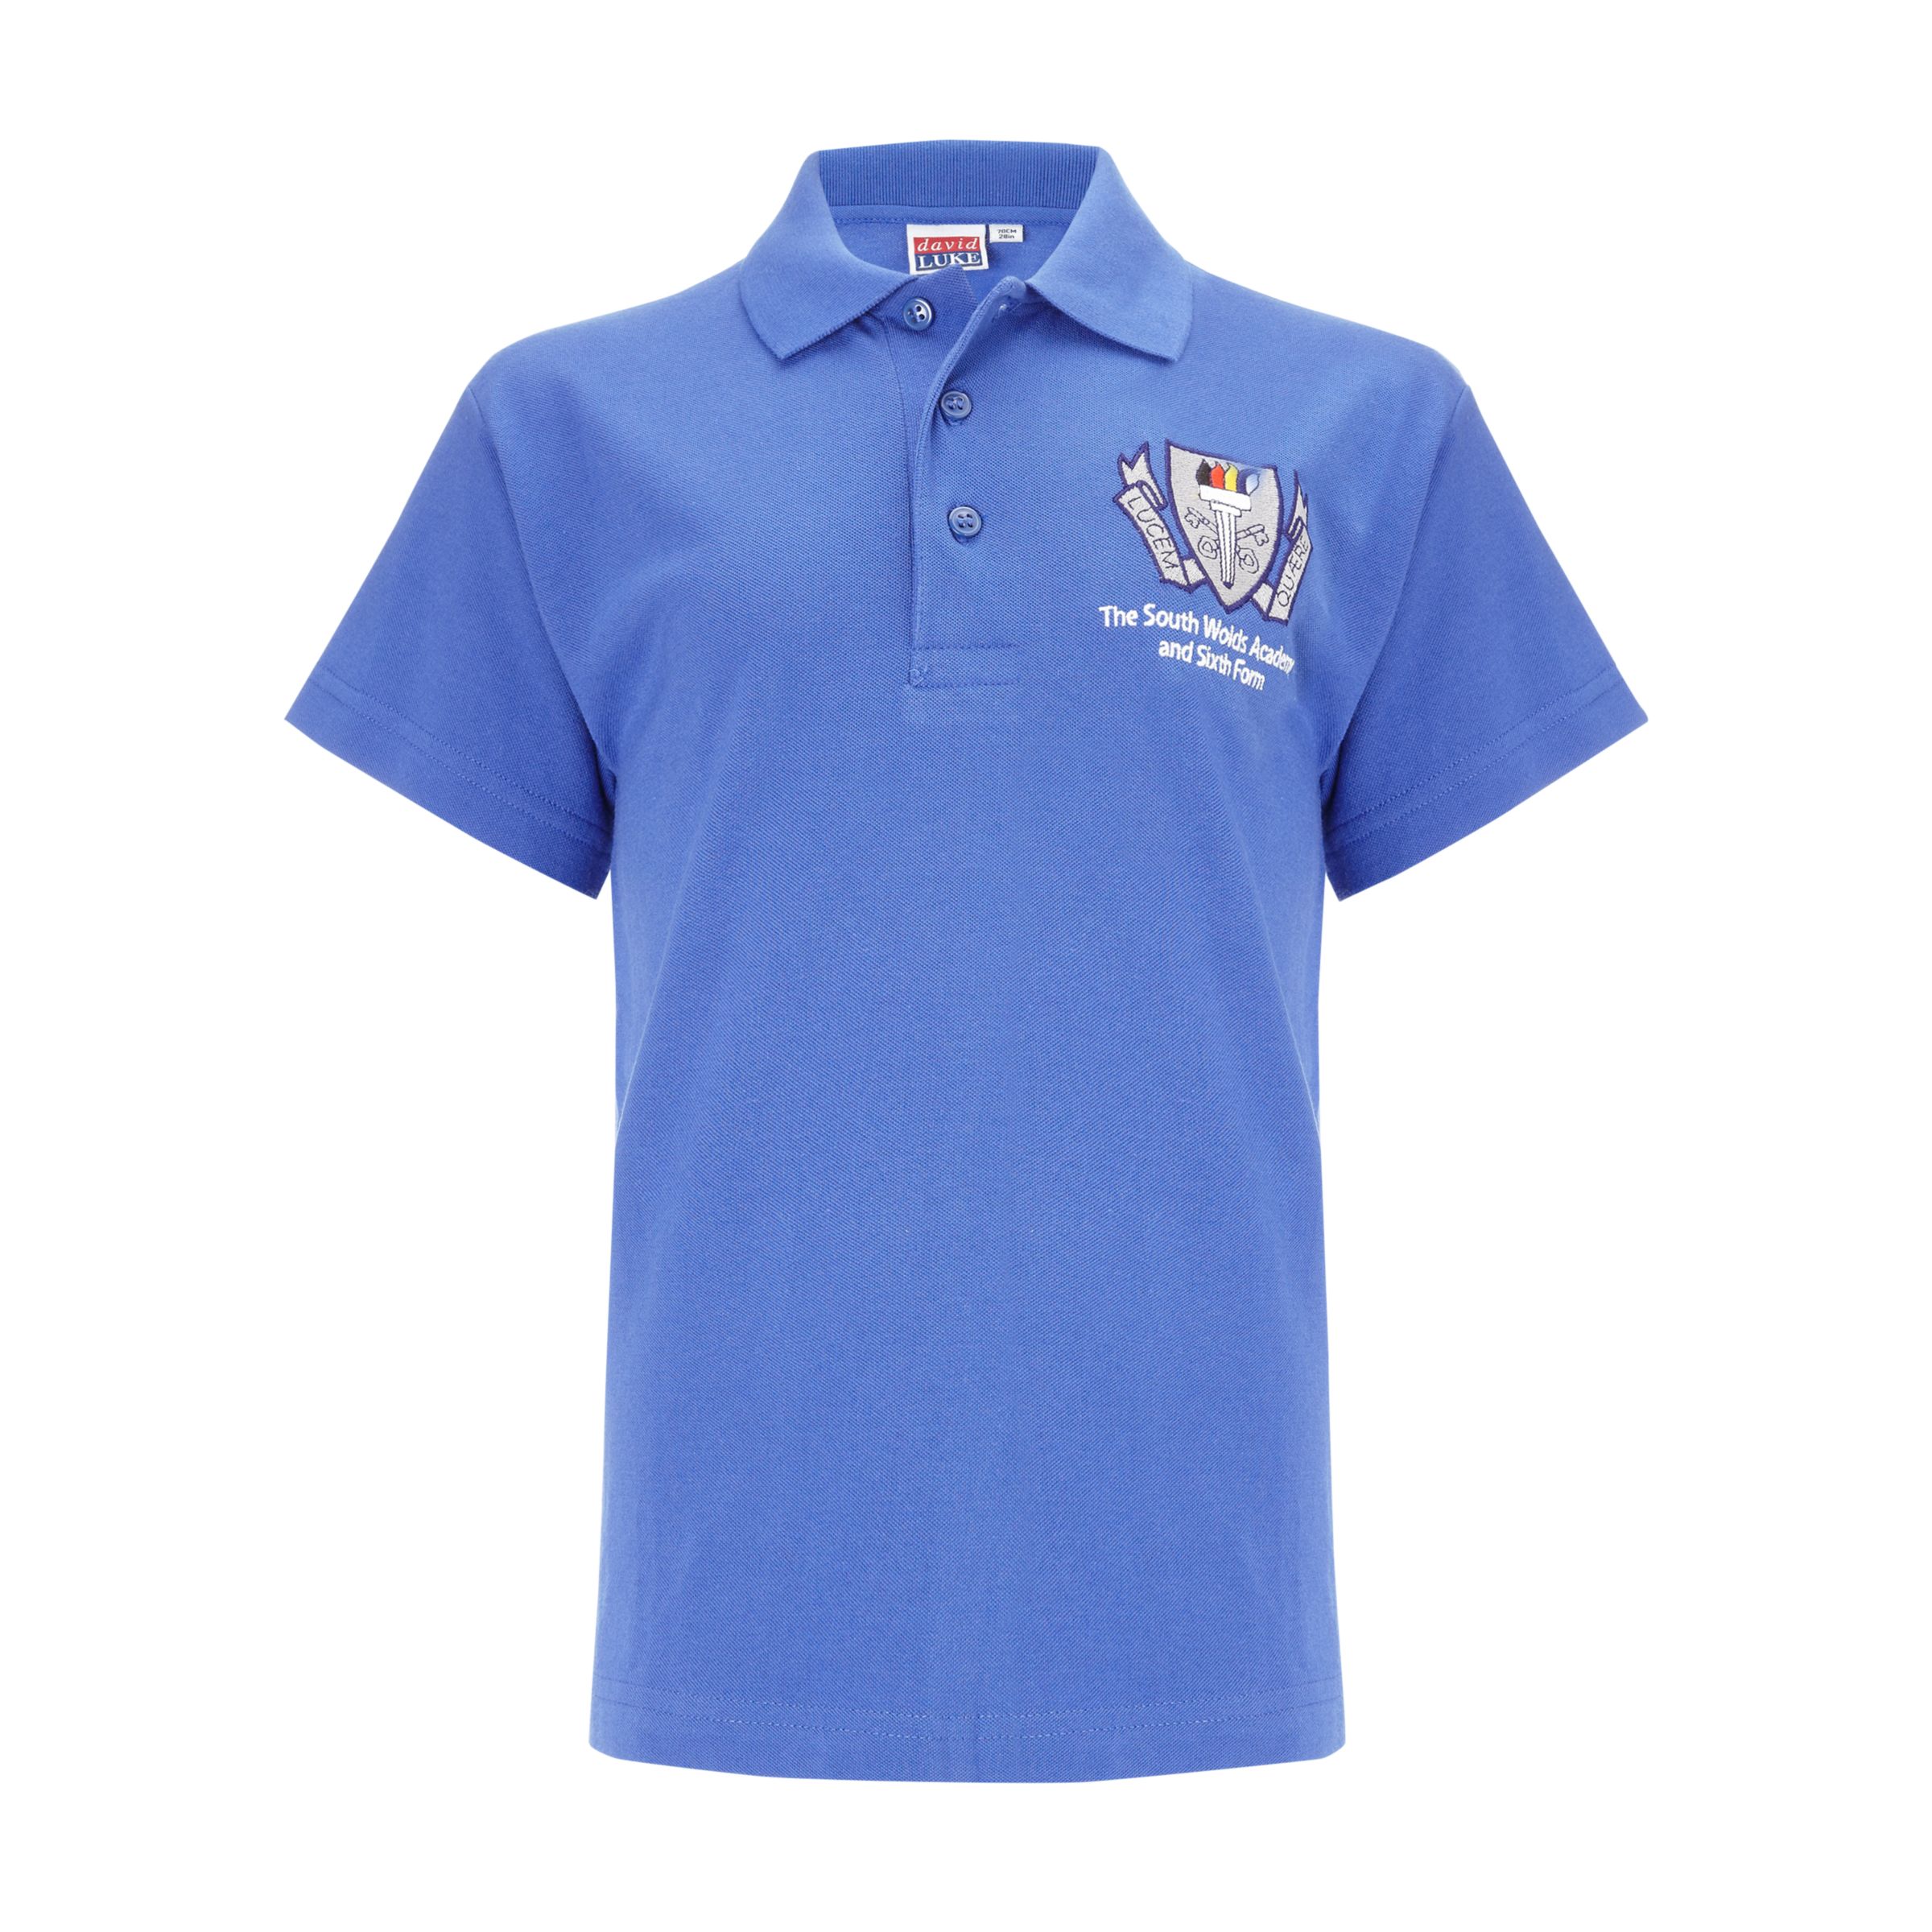 The South Wolds Academy & Sixth Form Unisex Polo Shirt, Royal Blue